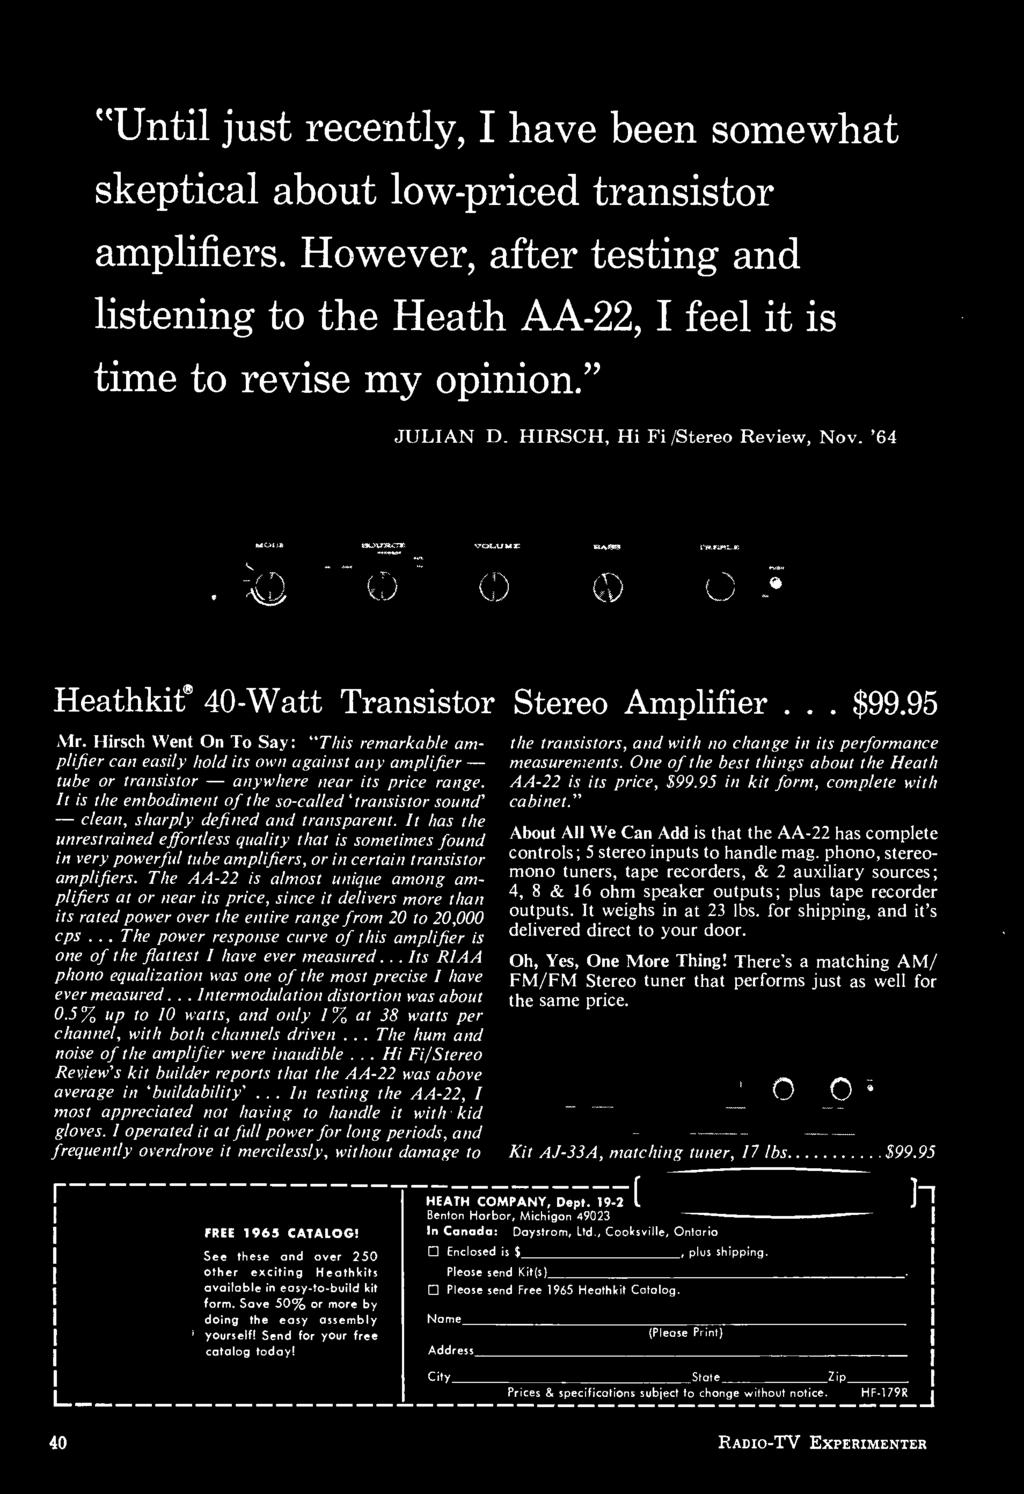 Hirsch Went On To Say: "This remarkable amplifier can easily hold its own against any amplifier - tube or transistor - anywhere near its price range.